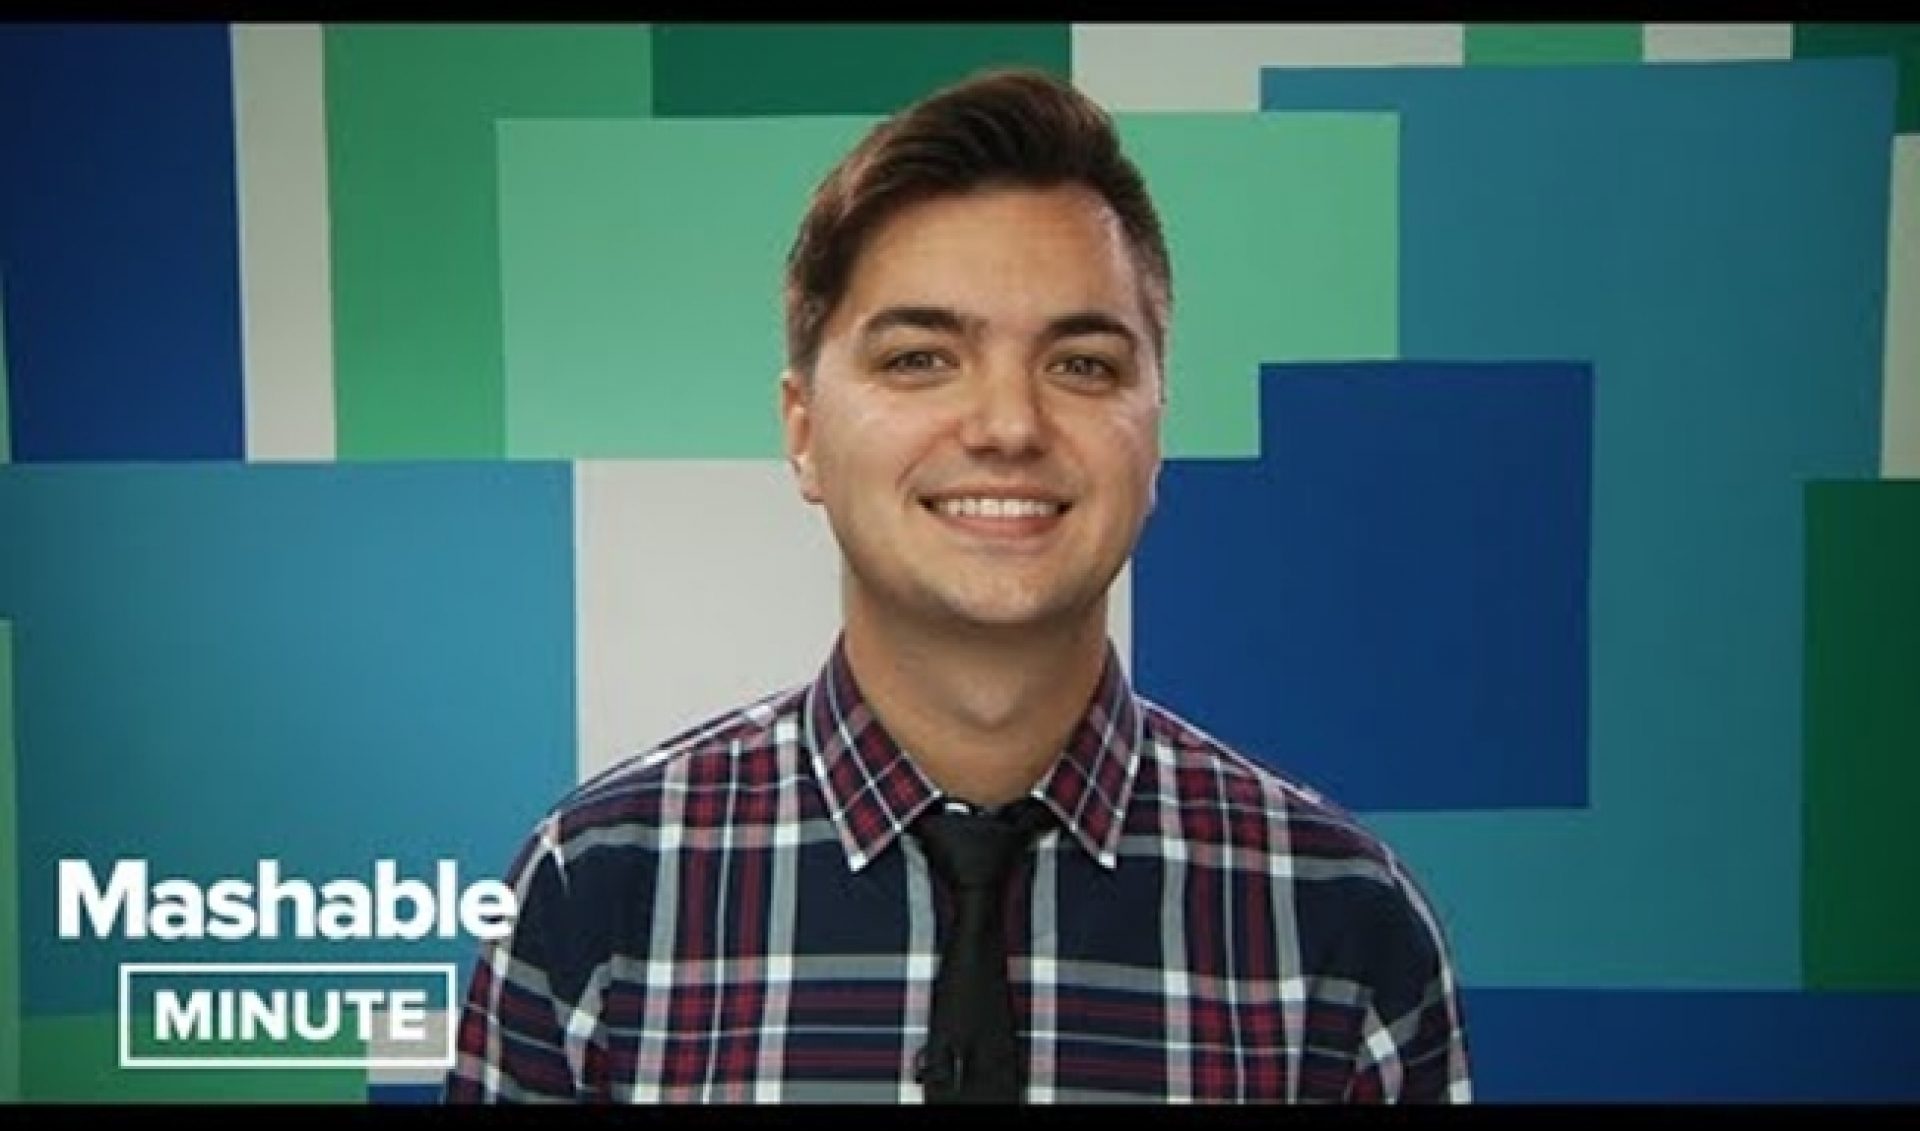 “Take A Minute” To Watch Elliott Morgan’s New Show With Mashable